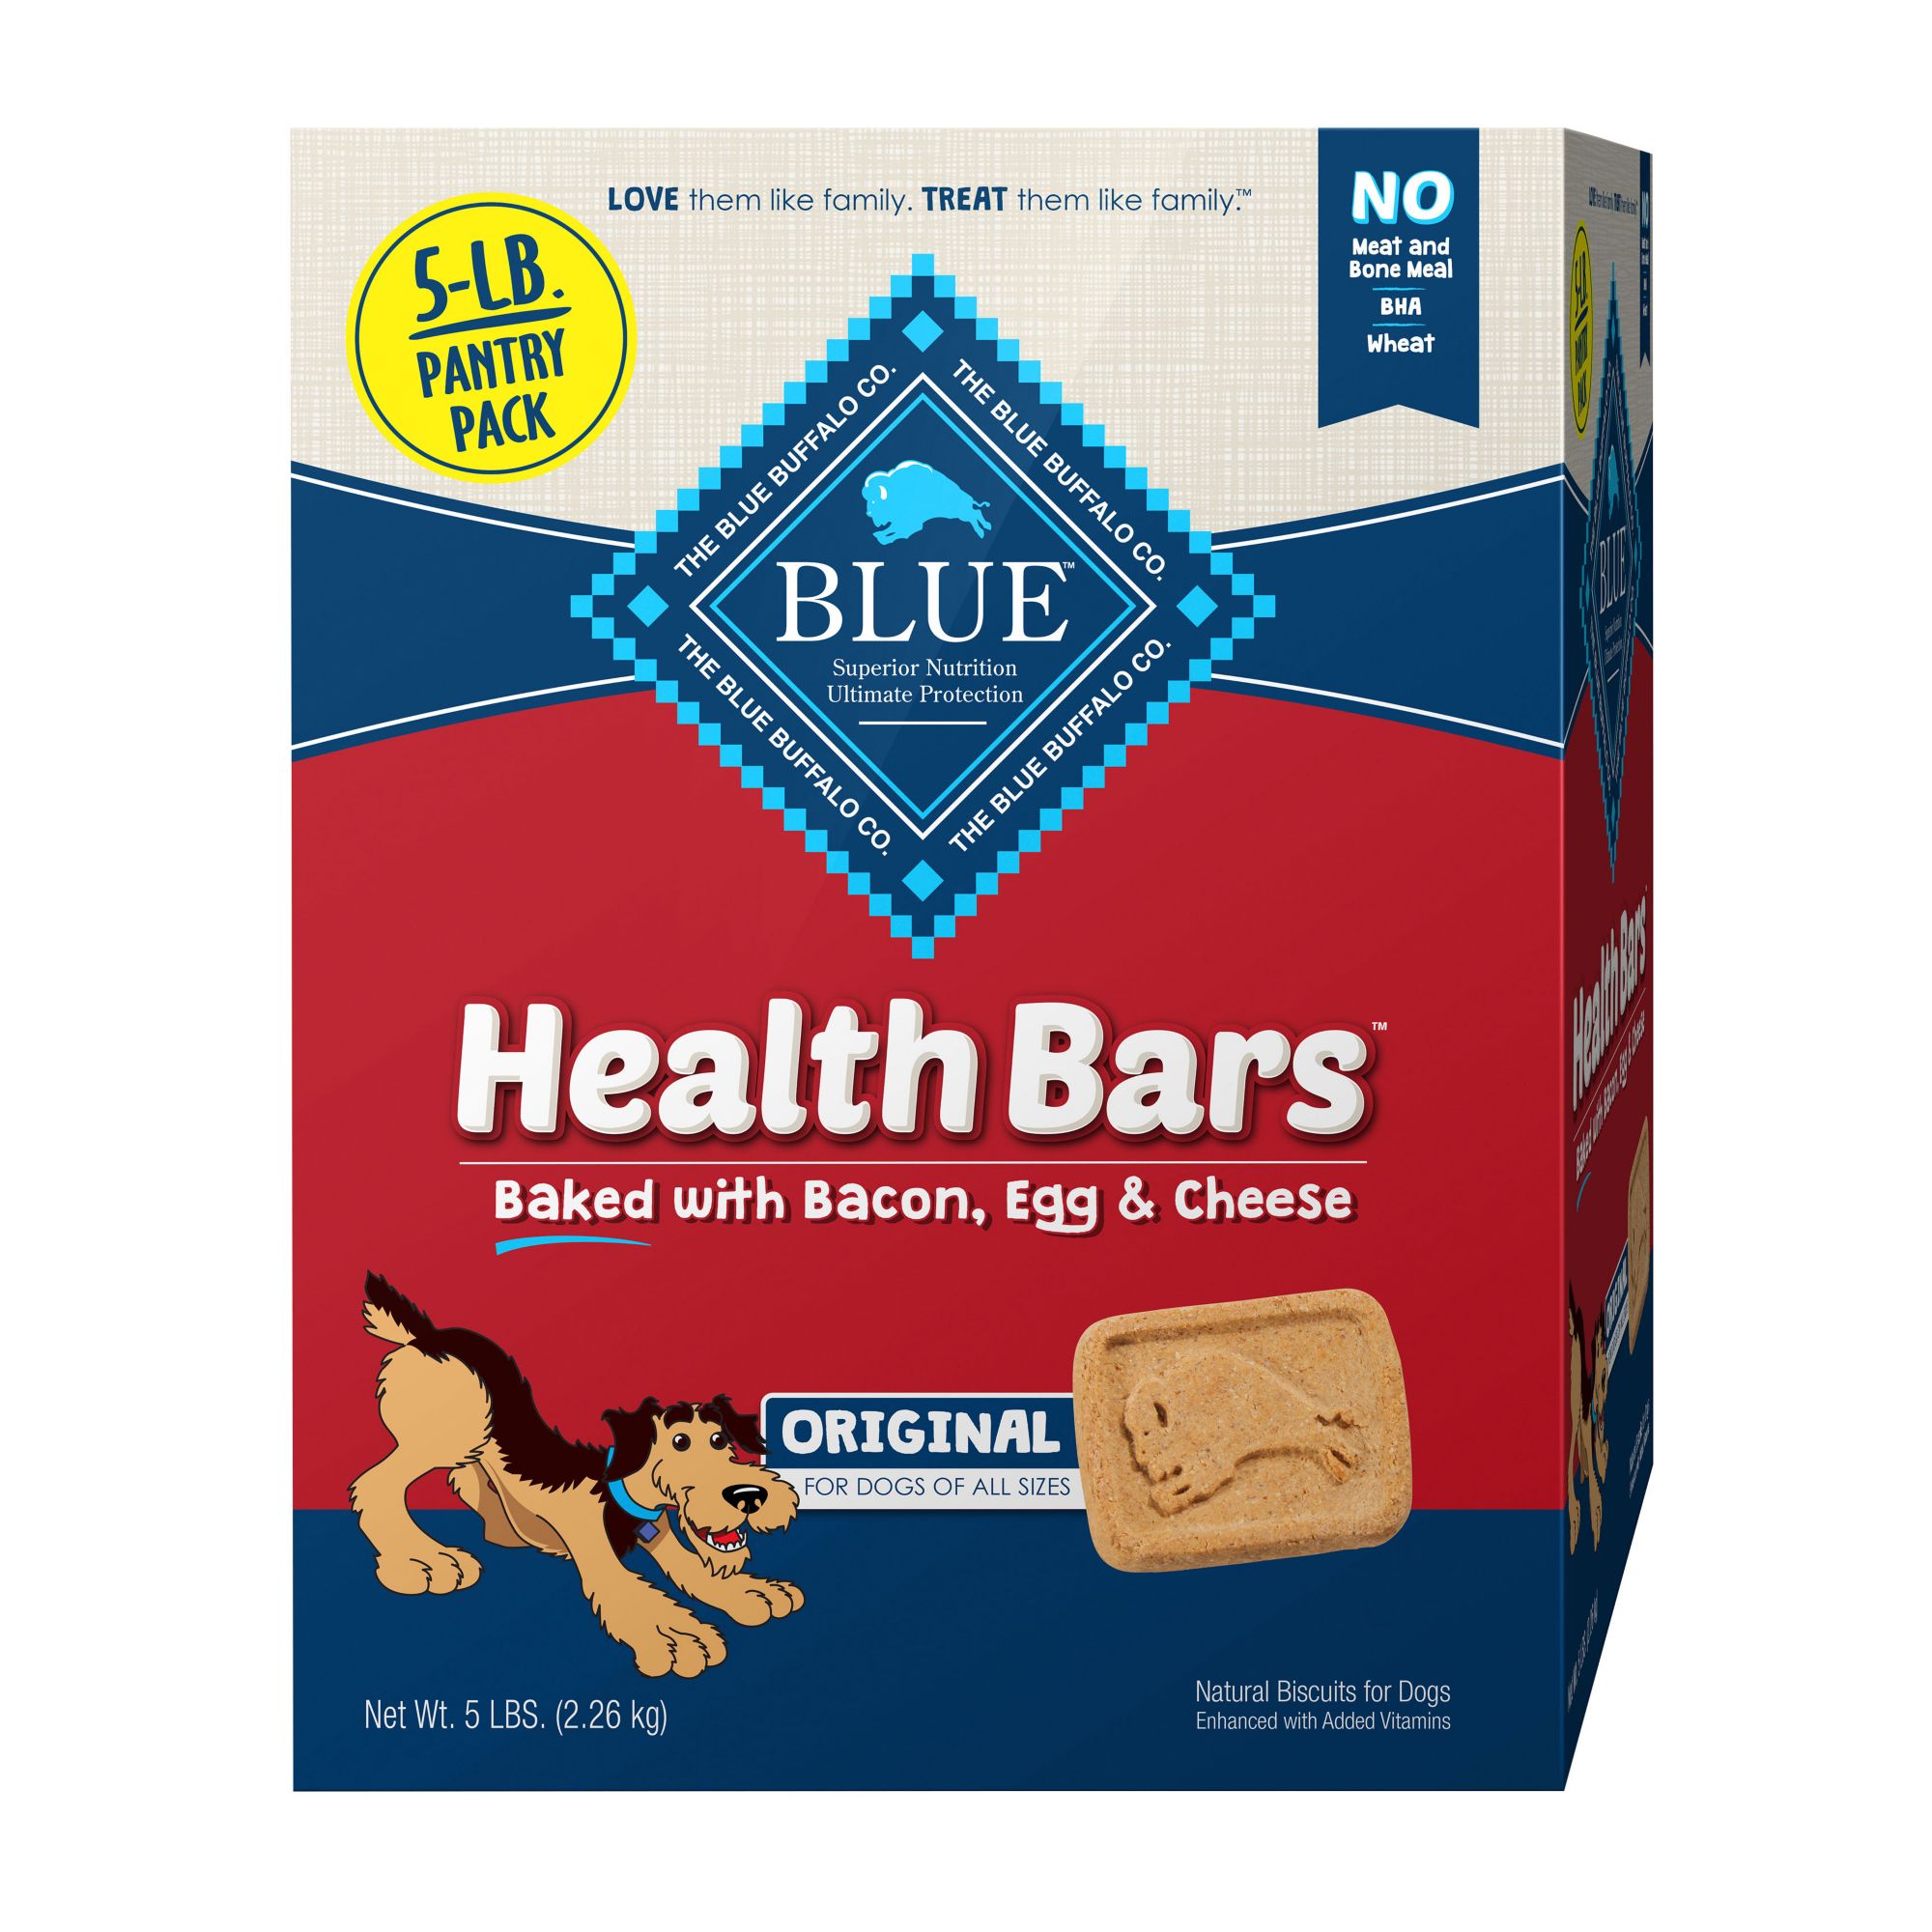 Cadet Real Beef Bully Sticks for Dogs, 8 oz.